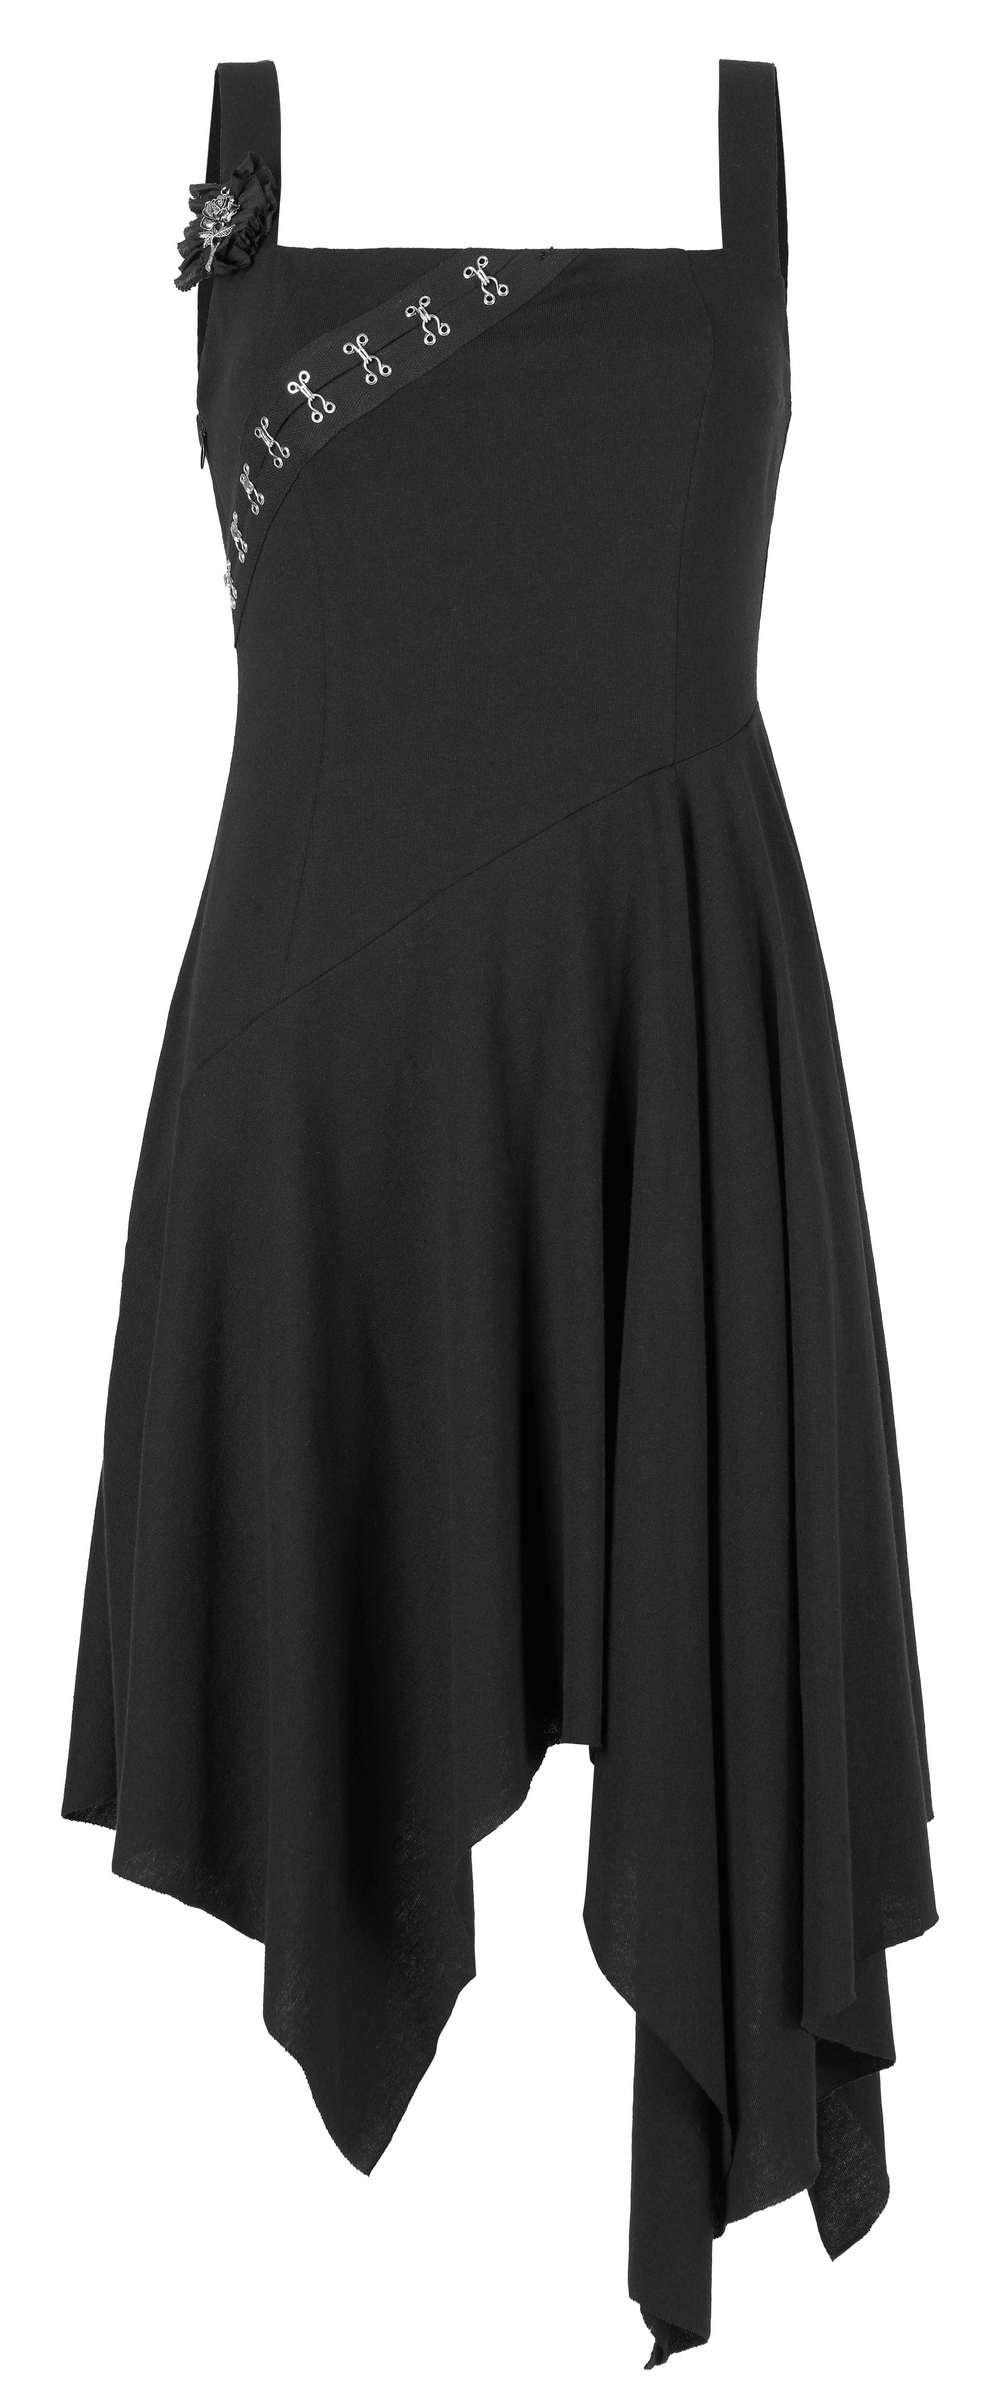 Edgy Asymmetrical Black Dress with Brooch Detail